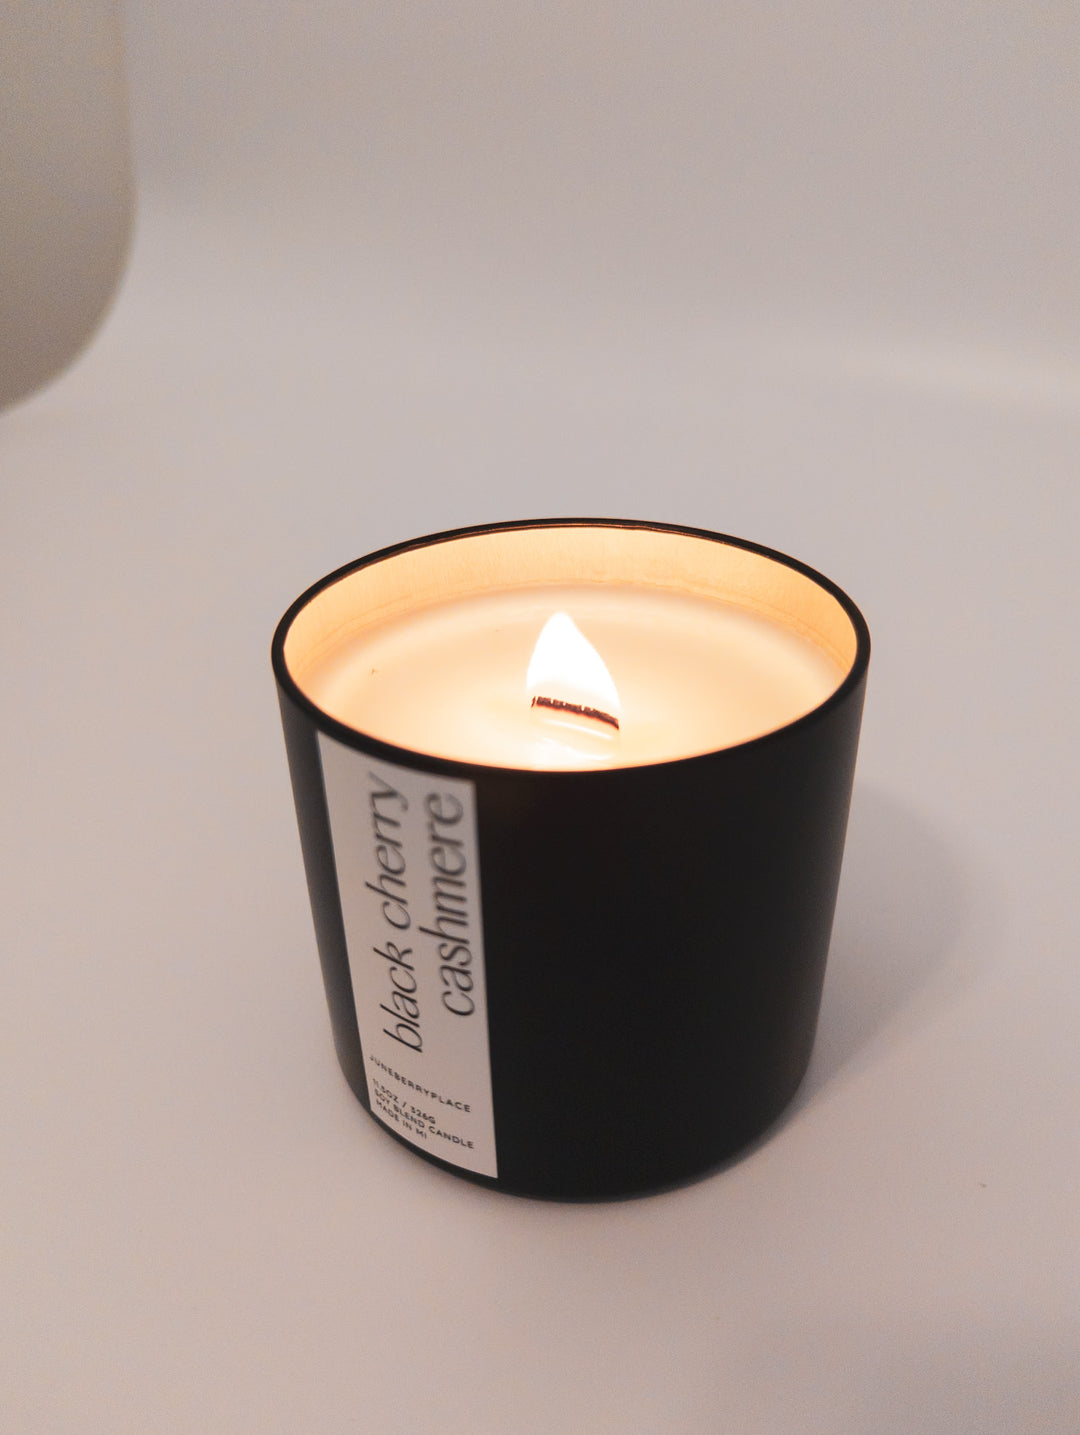 Black Cherry Cashmere Wood Wick Candle in matte black vessel by juneberryplace home fragrances